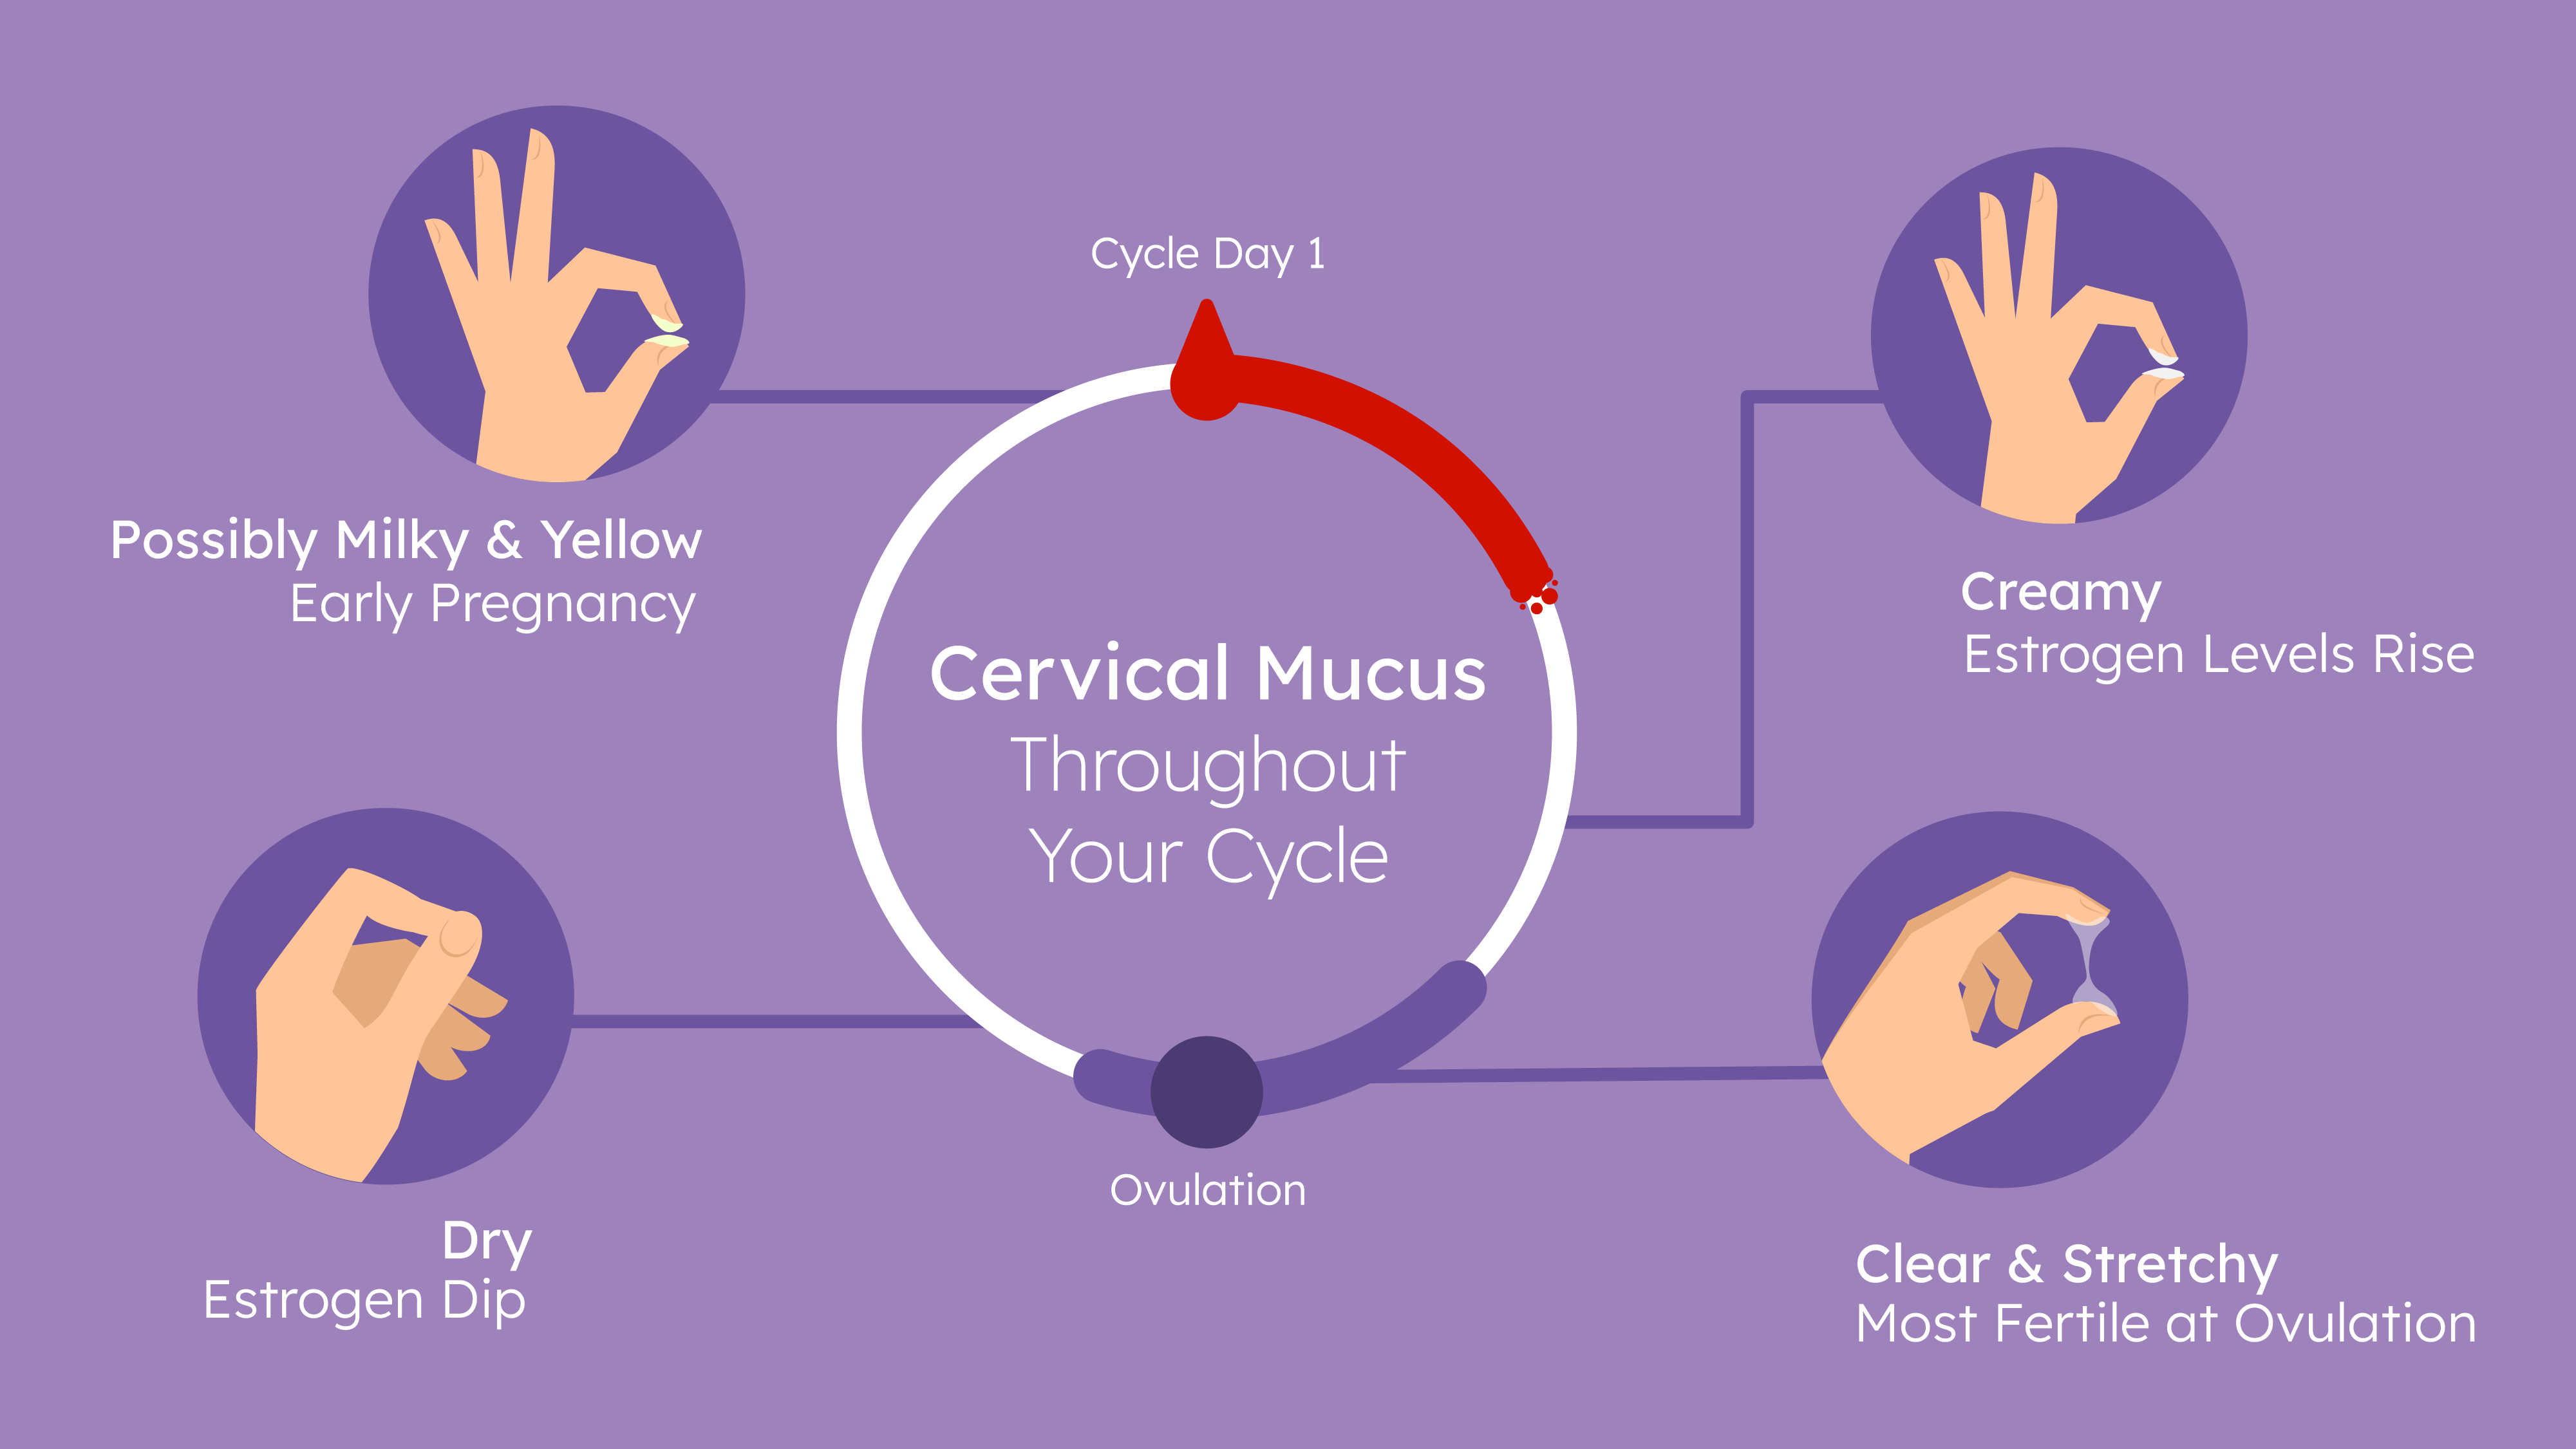 Cervical mucus is the fluid produced by your cervix during your